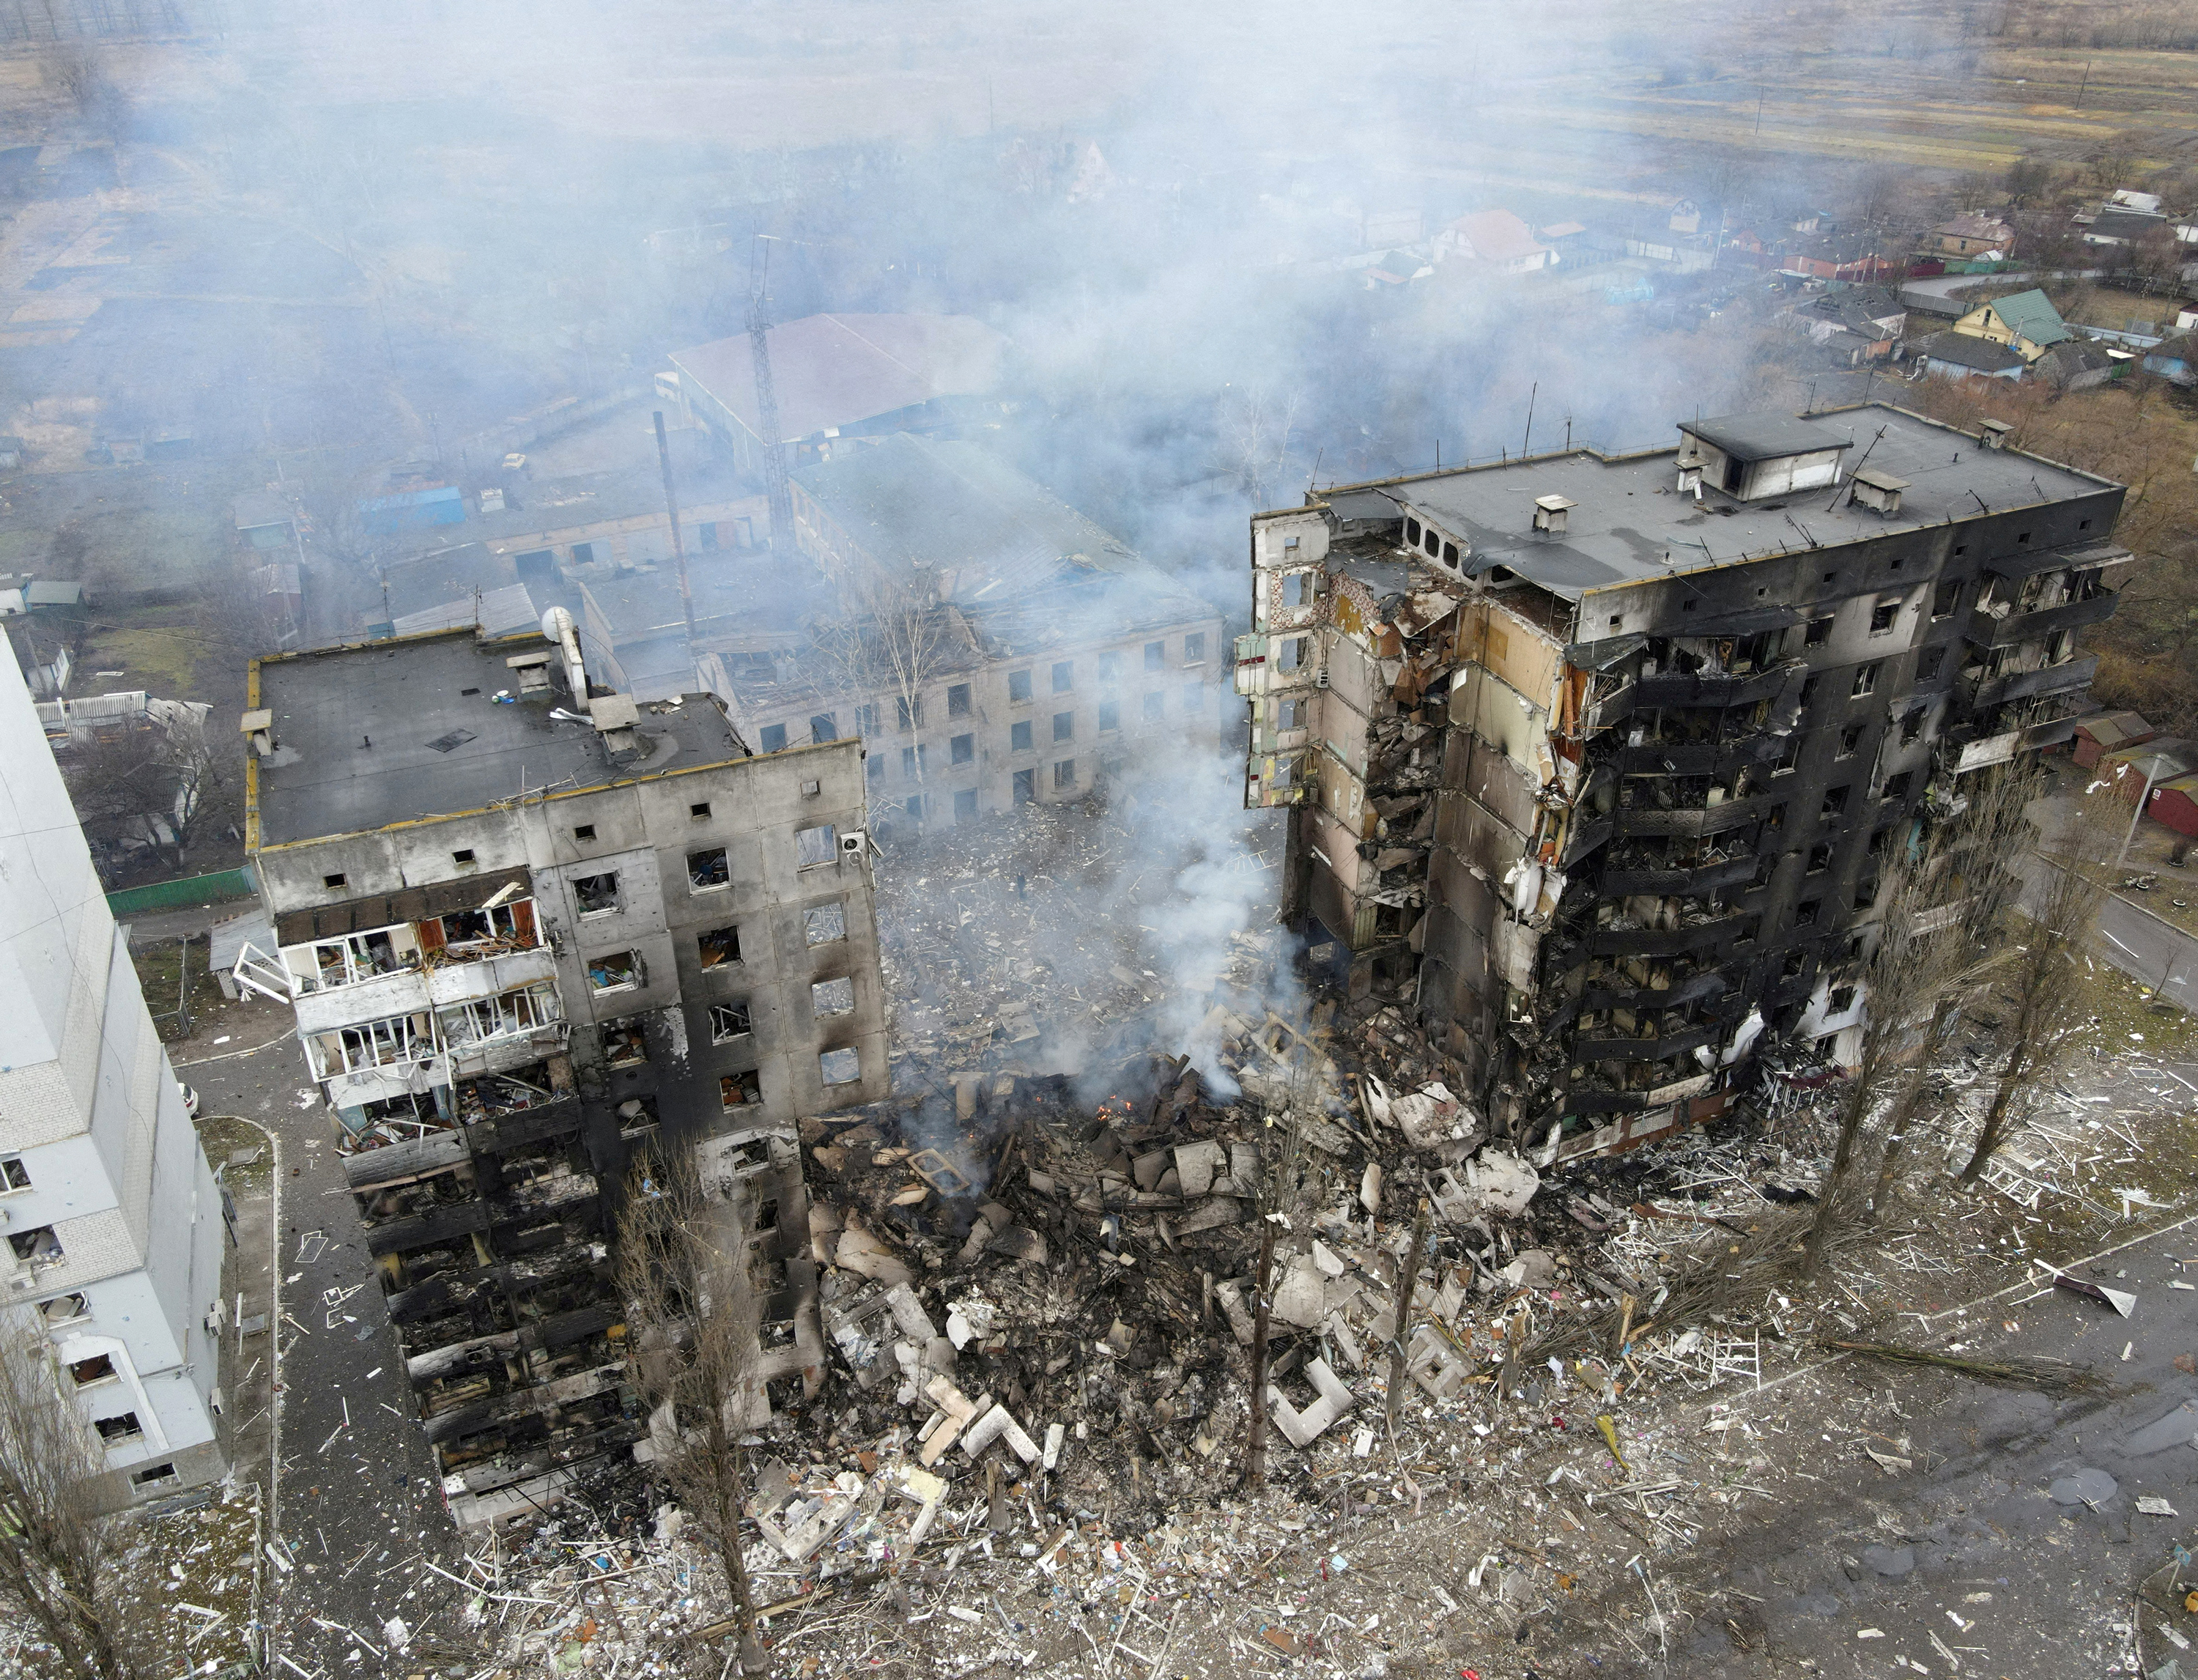 On March 3, a residential building destroyed by shelling can be seen in Borodyanka, Ukraine.